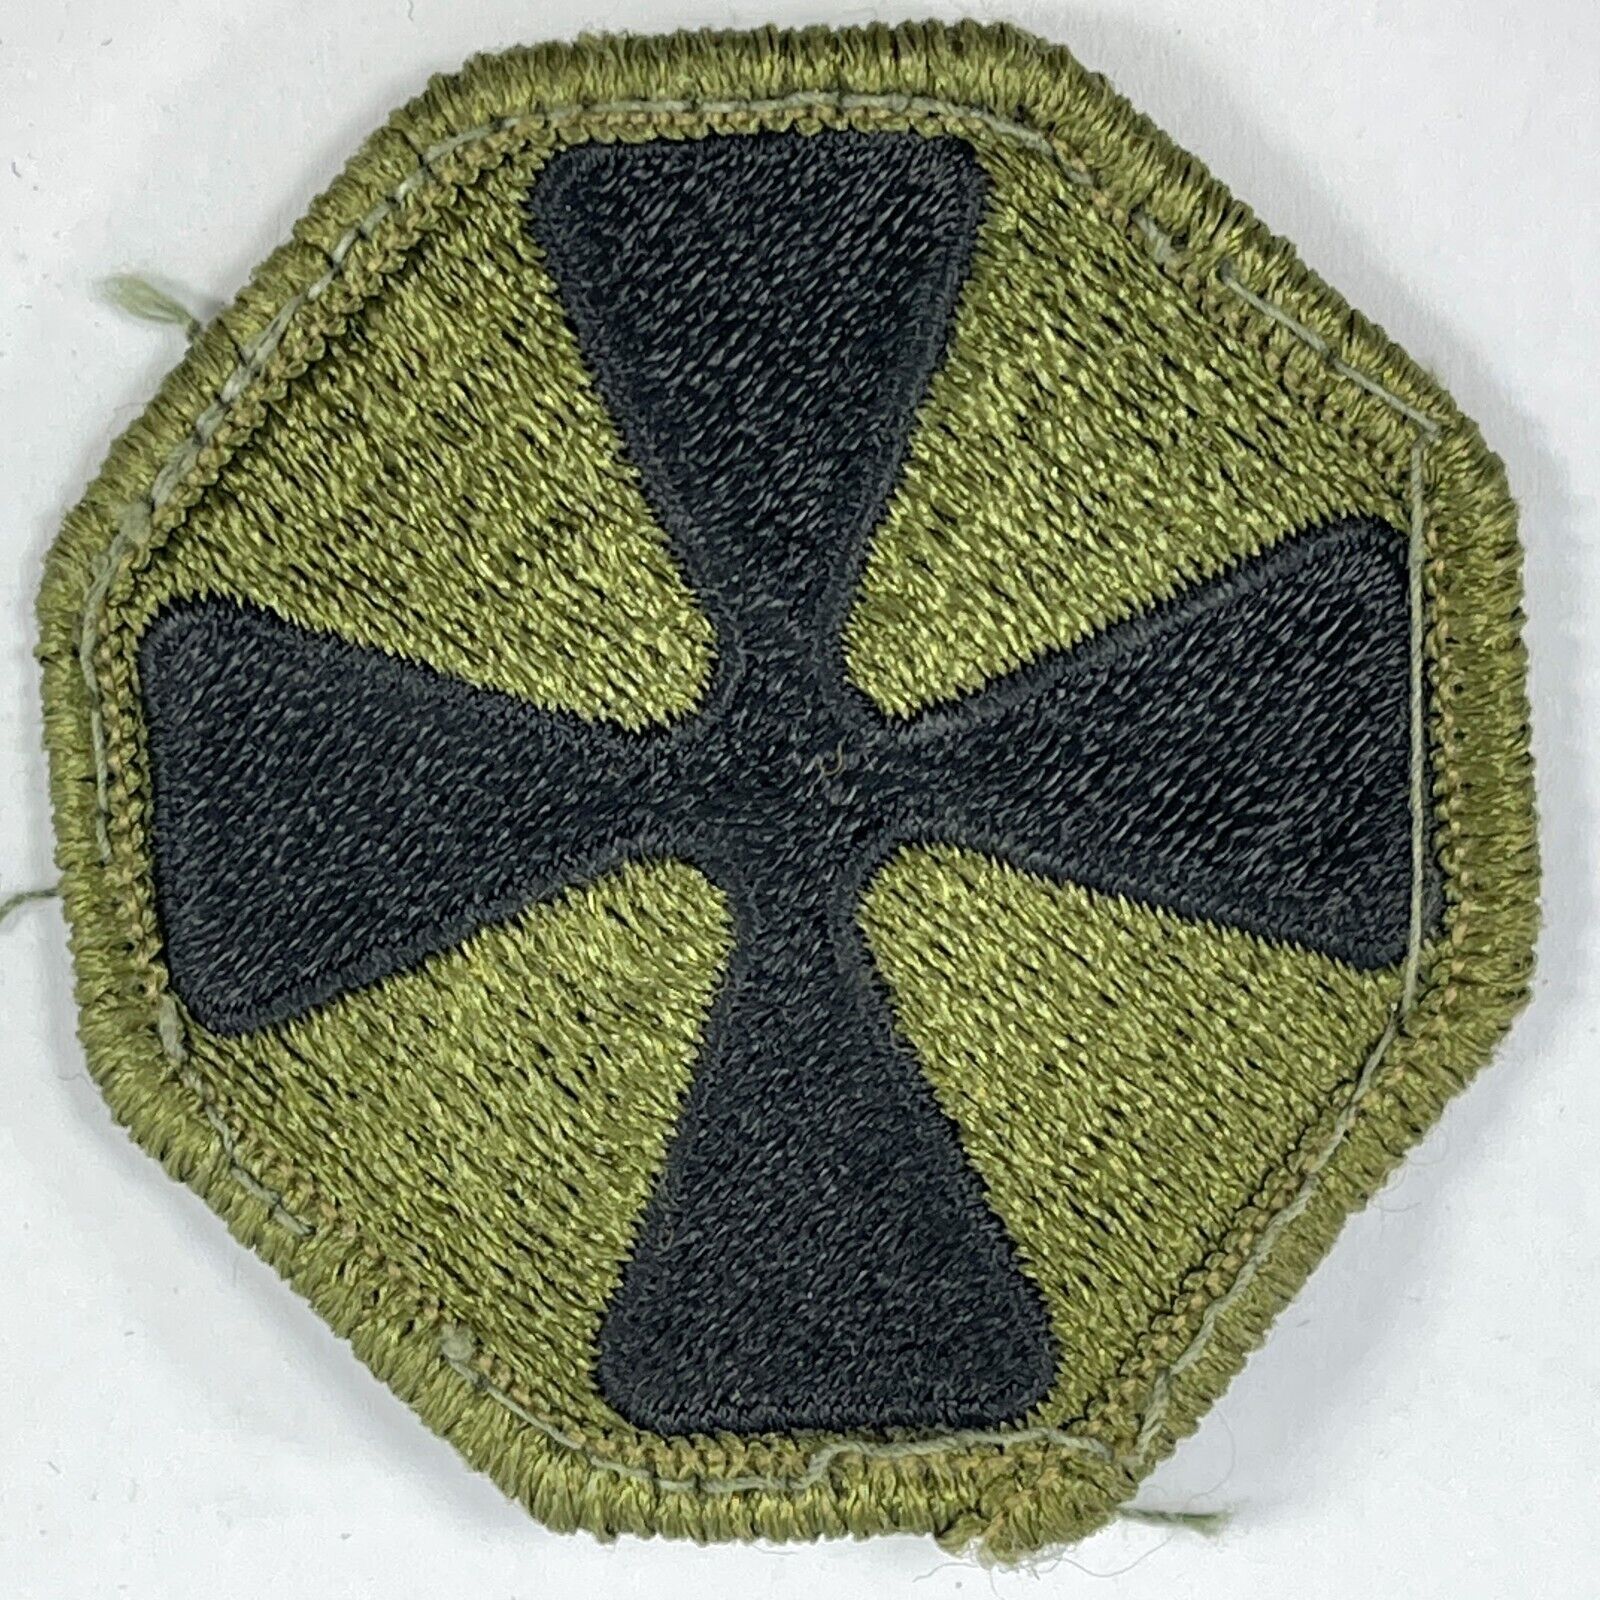 US ARMY 8TH ARMY SUBDUED PATCH 2.25\